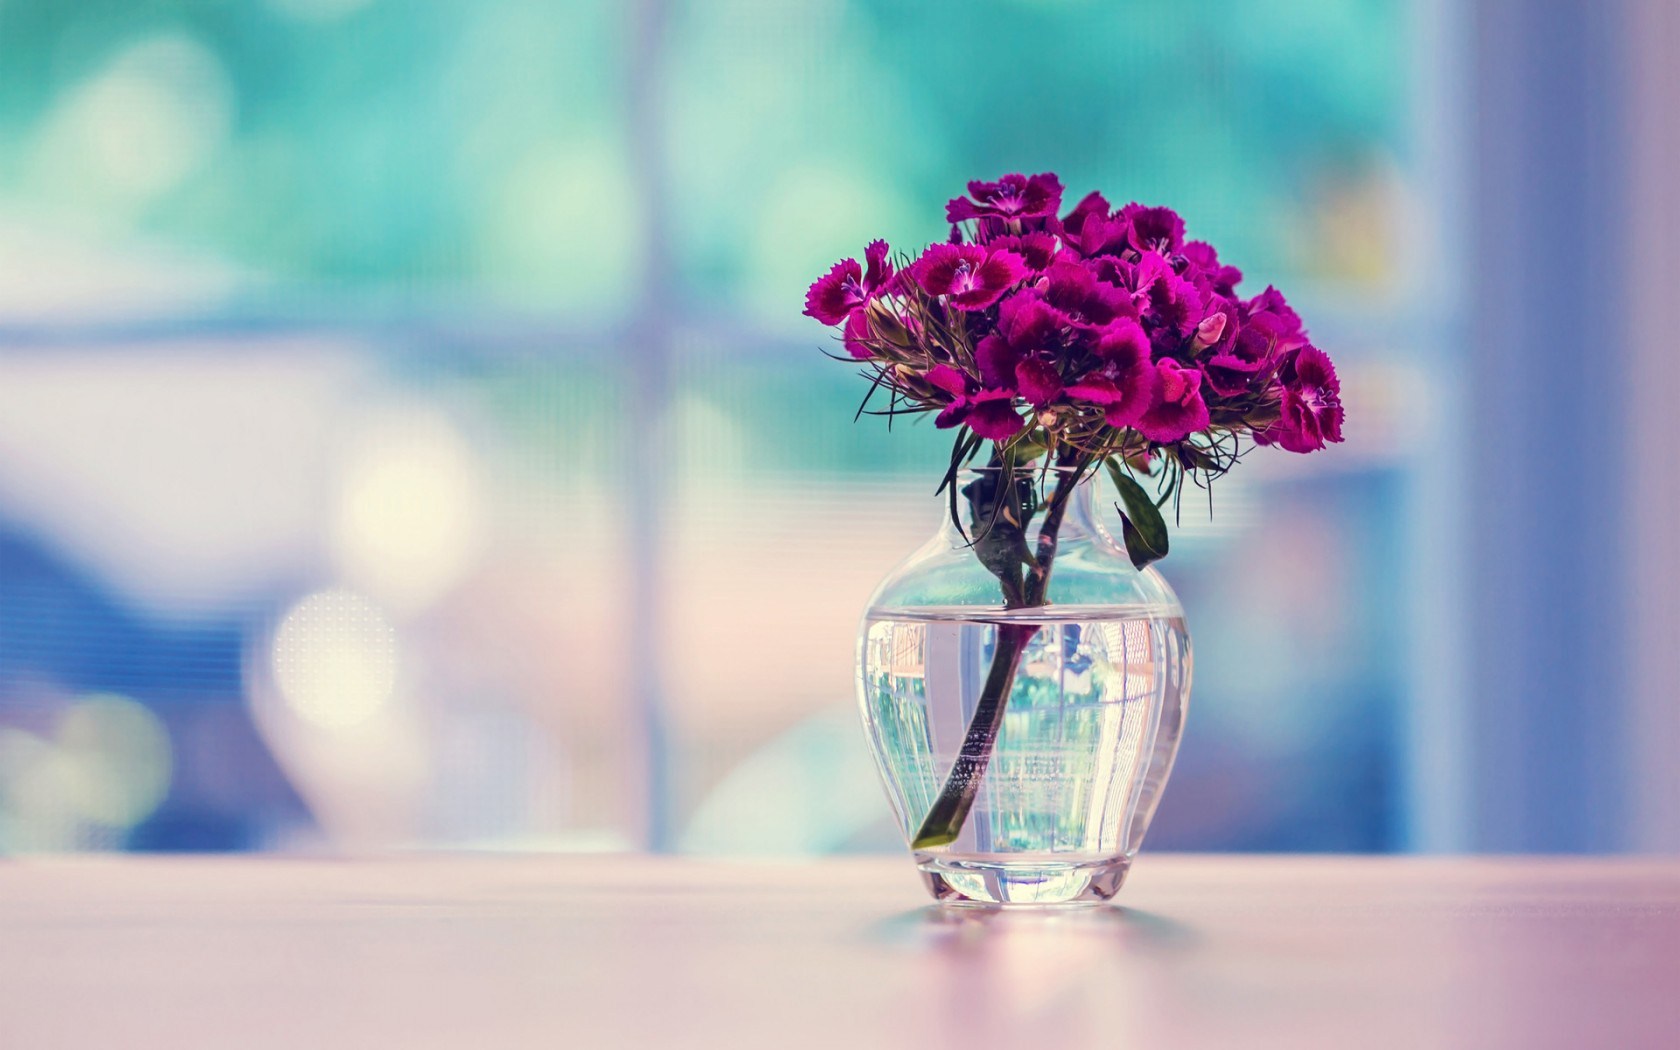 Lovely Vase Pictures